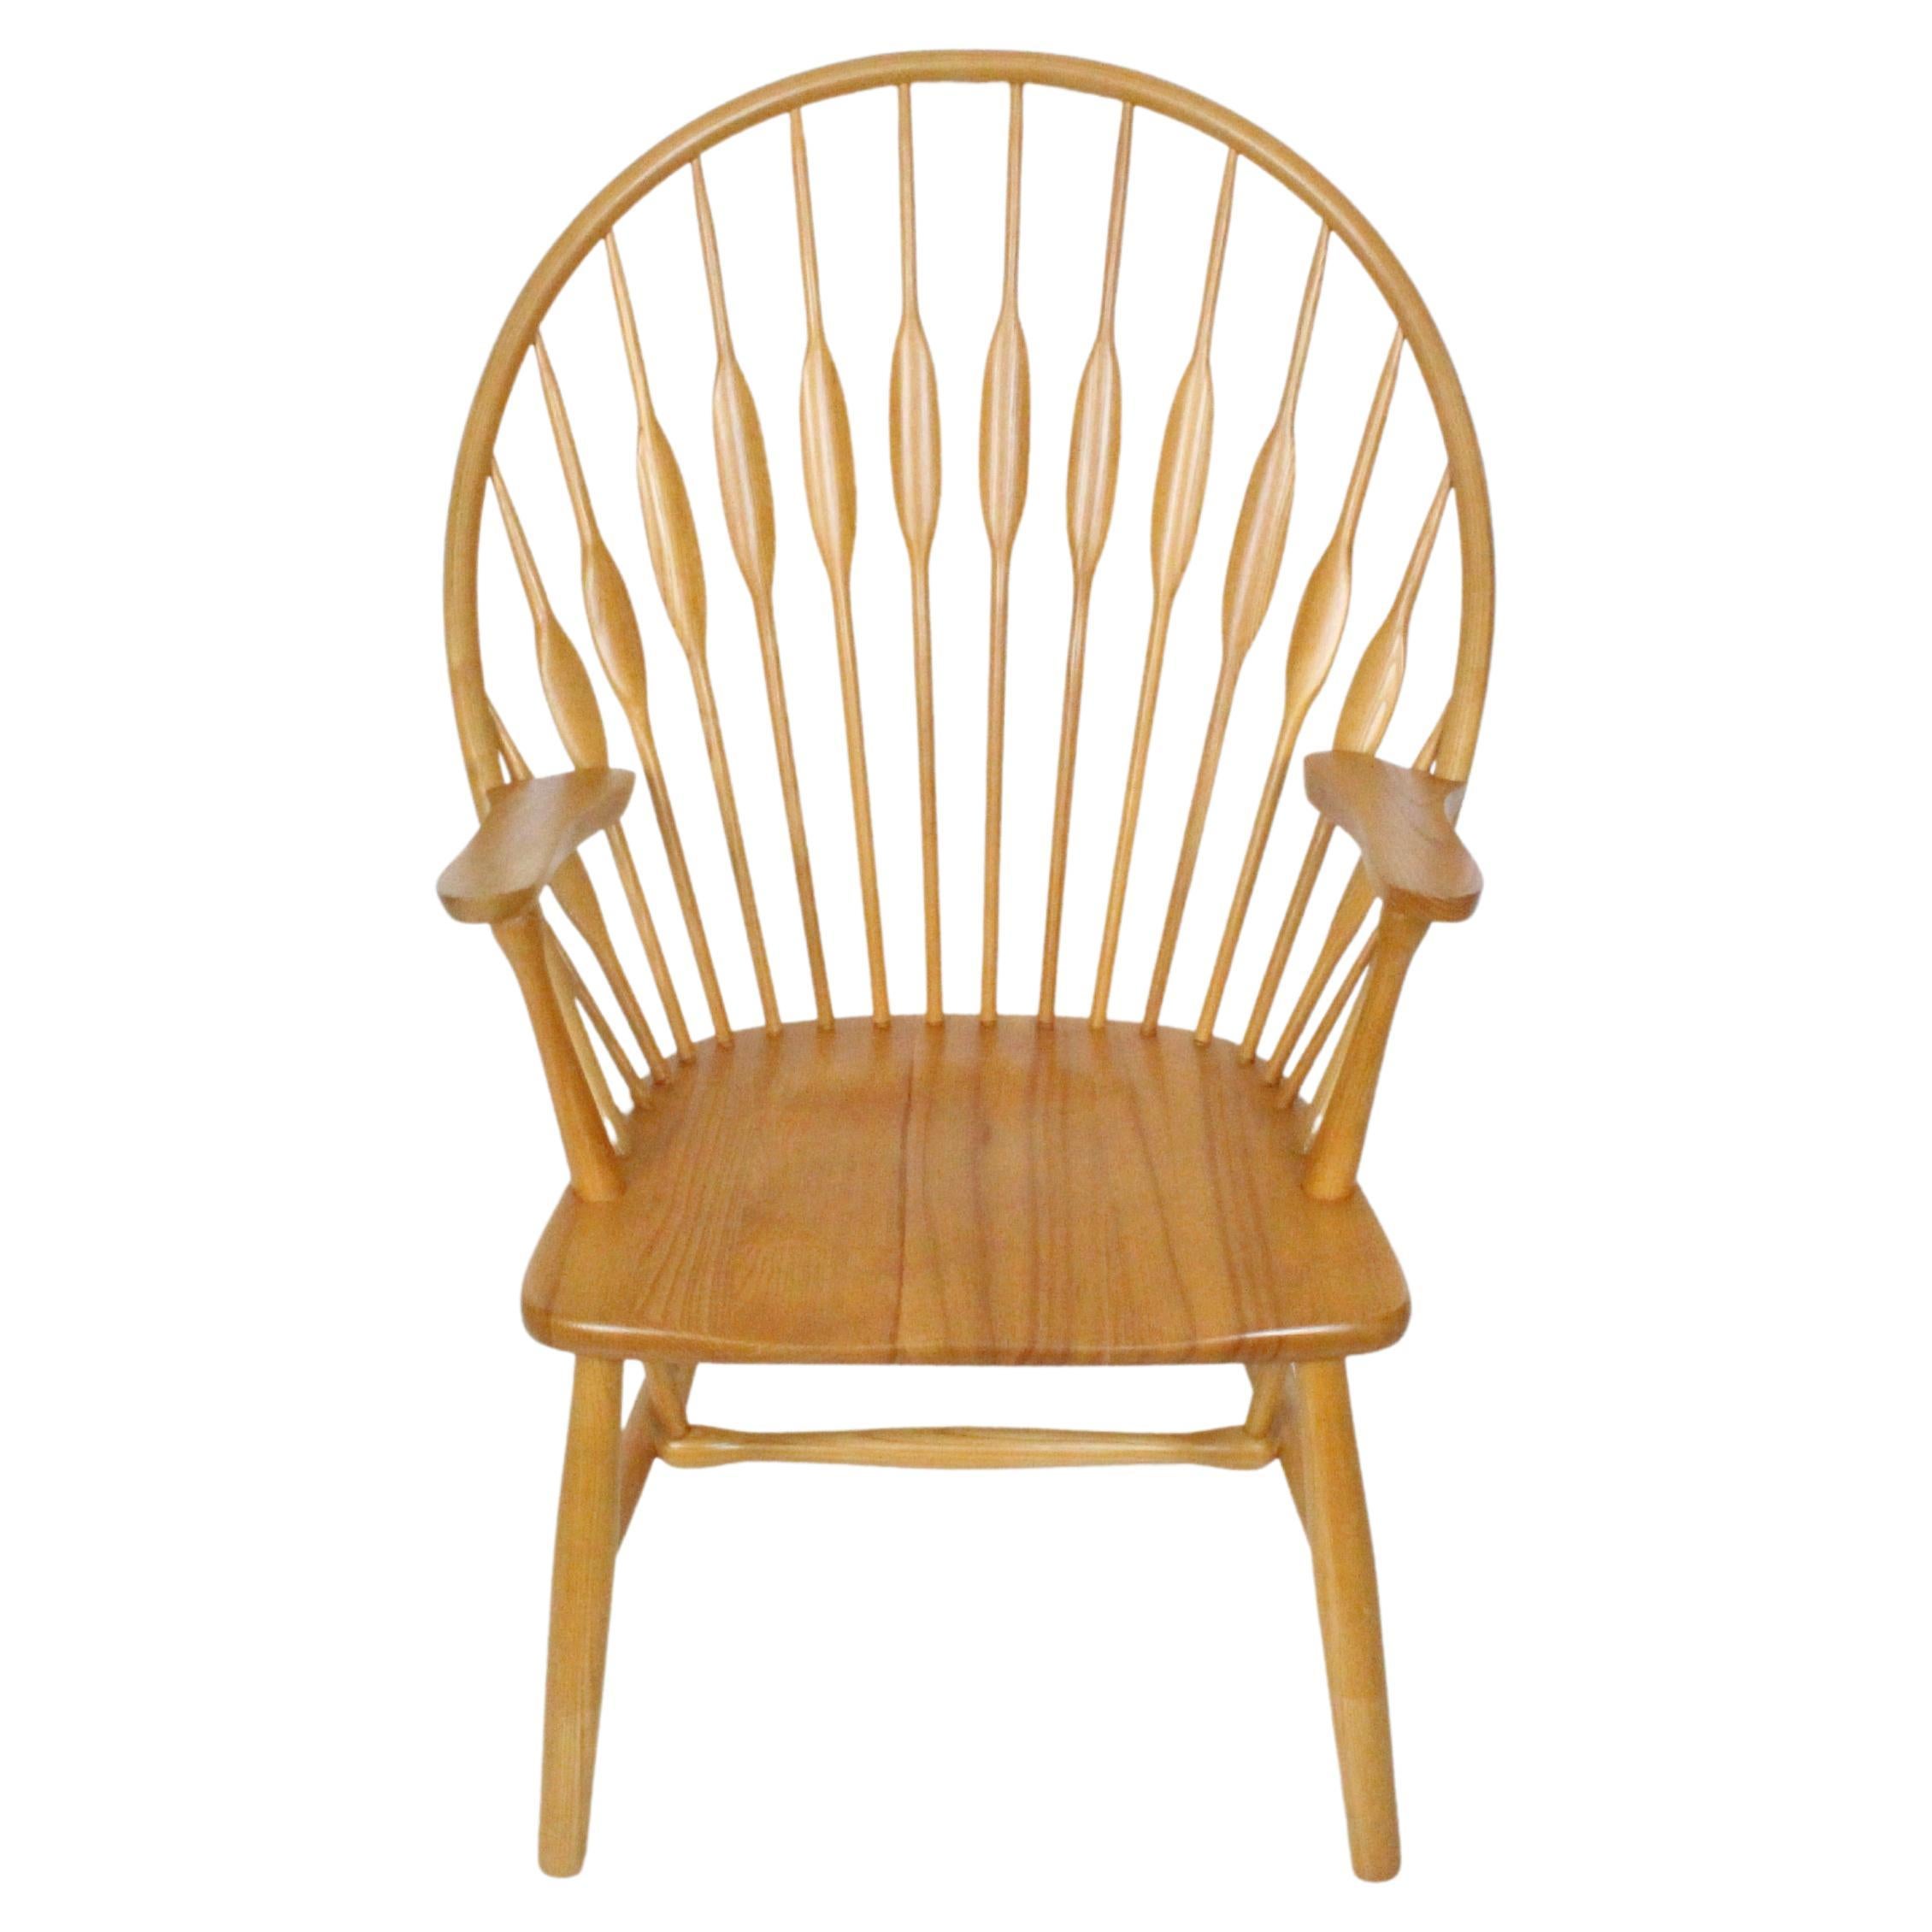 Hans Wegner Style "Peacock" Arm Chair, in solid Ash, 1970's